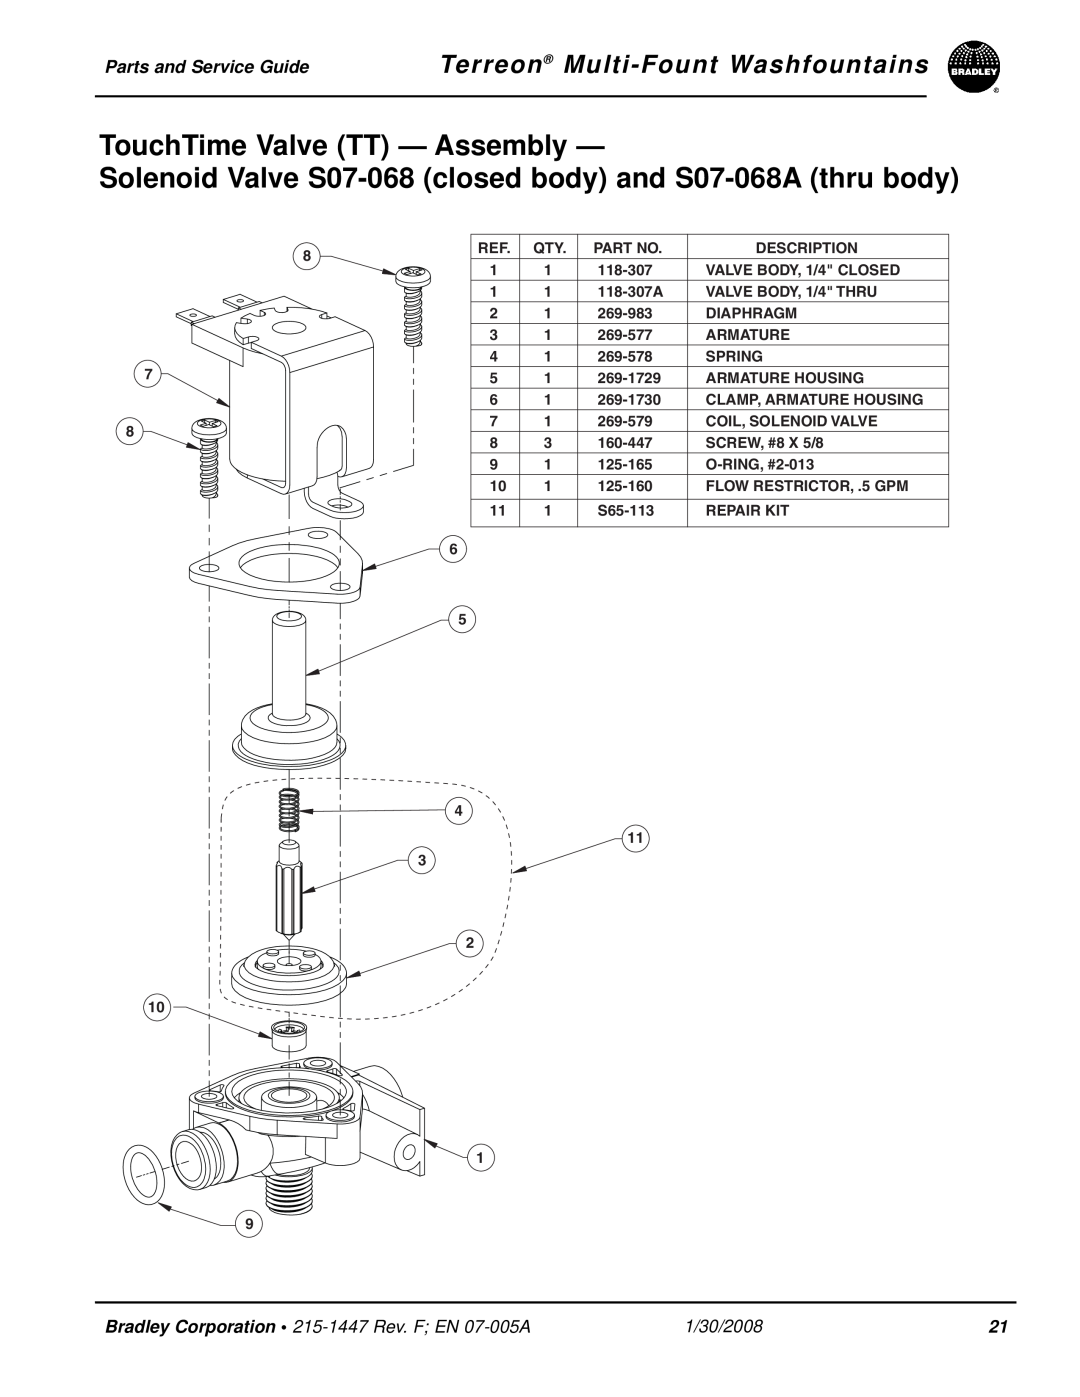 Bradley Smoker Indoor Furnishings TouchTime Valve TT - Assembly, Terreon Multi-FountWashfountains, Parts and Service Guide 